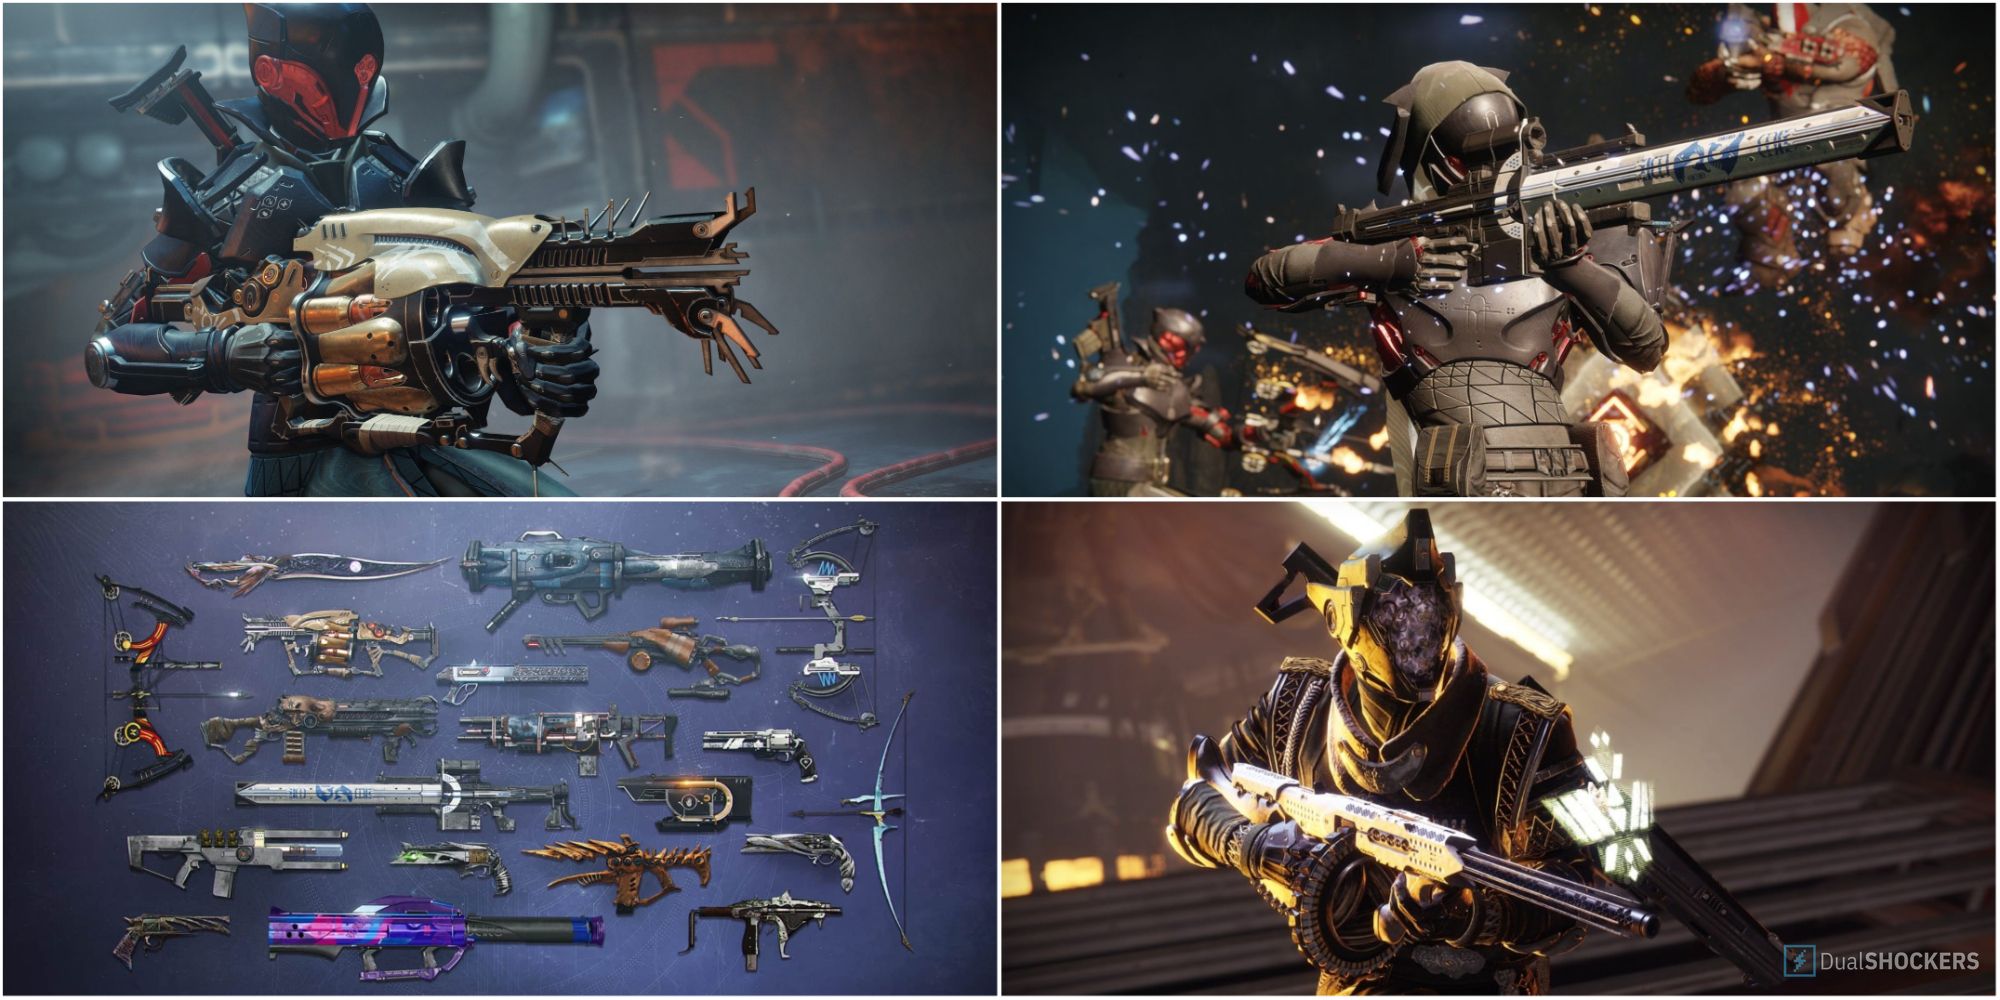 Action Images of the Exotic Weapons From Destiny 2 in a Collage